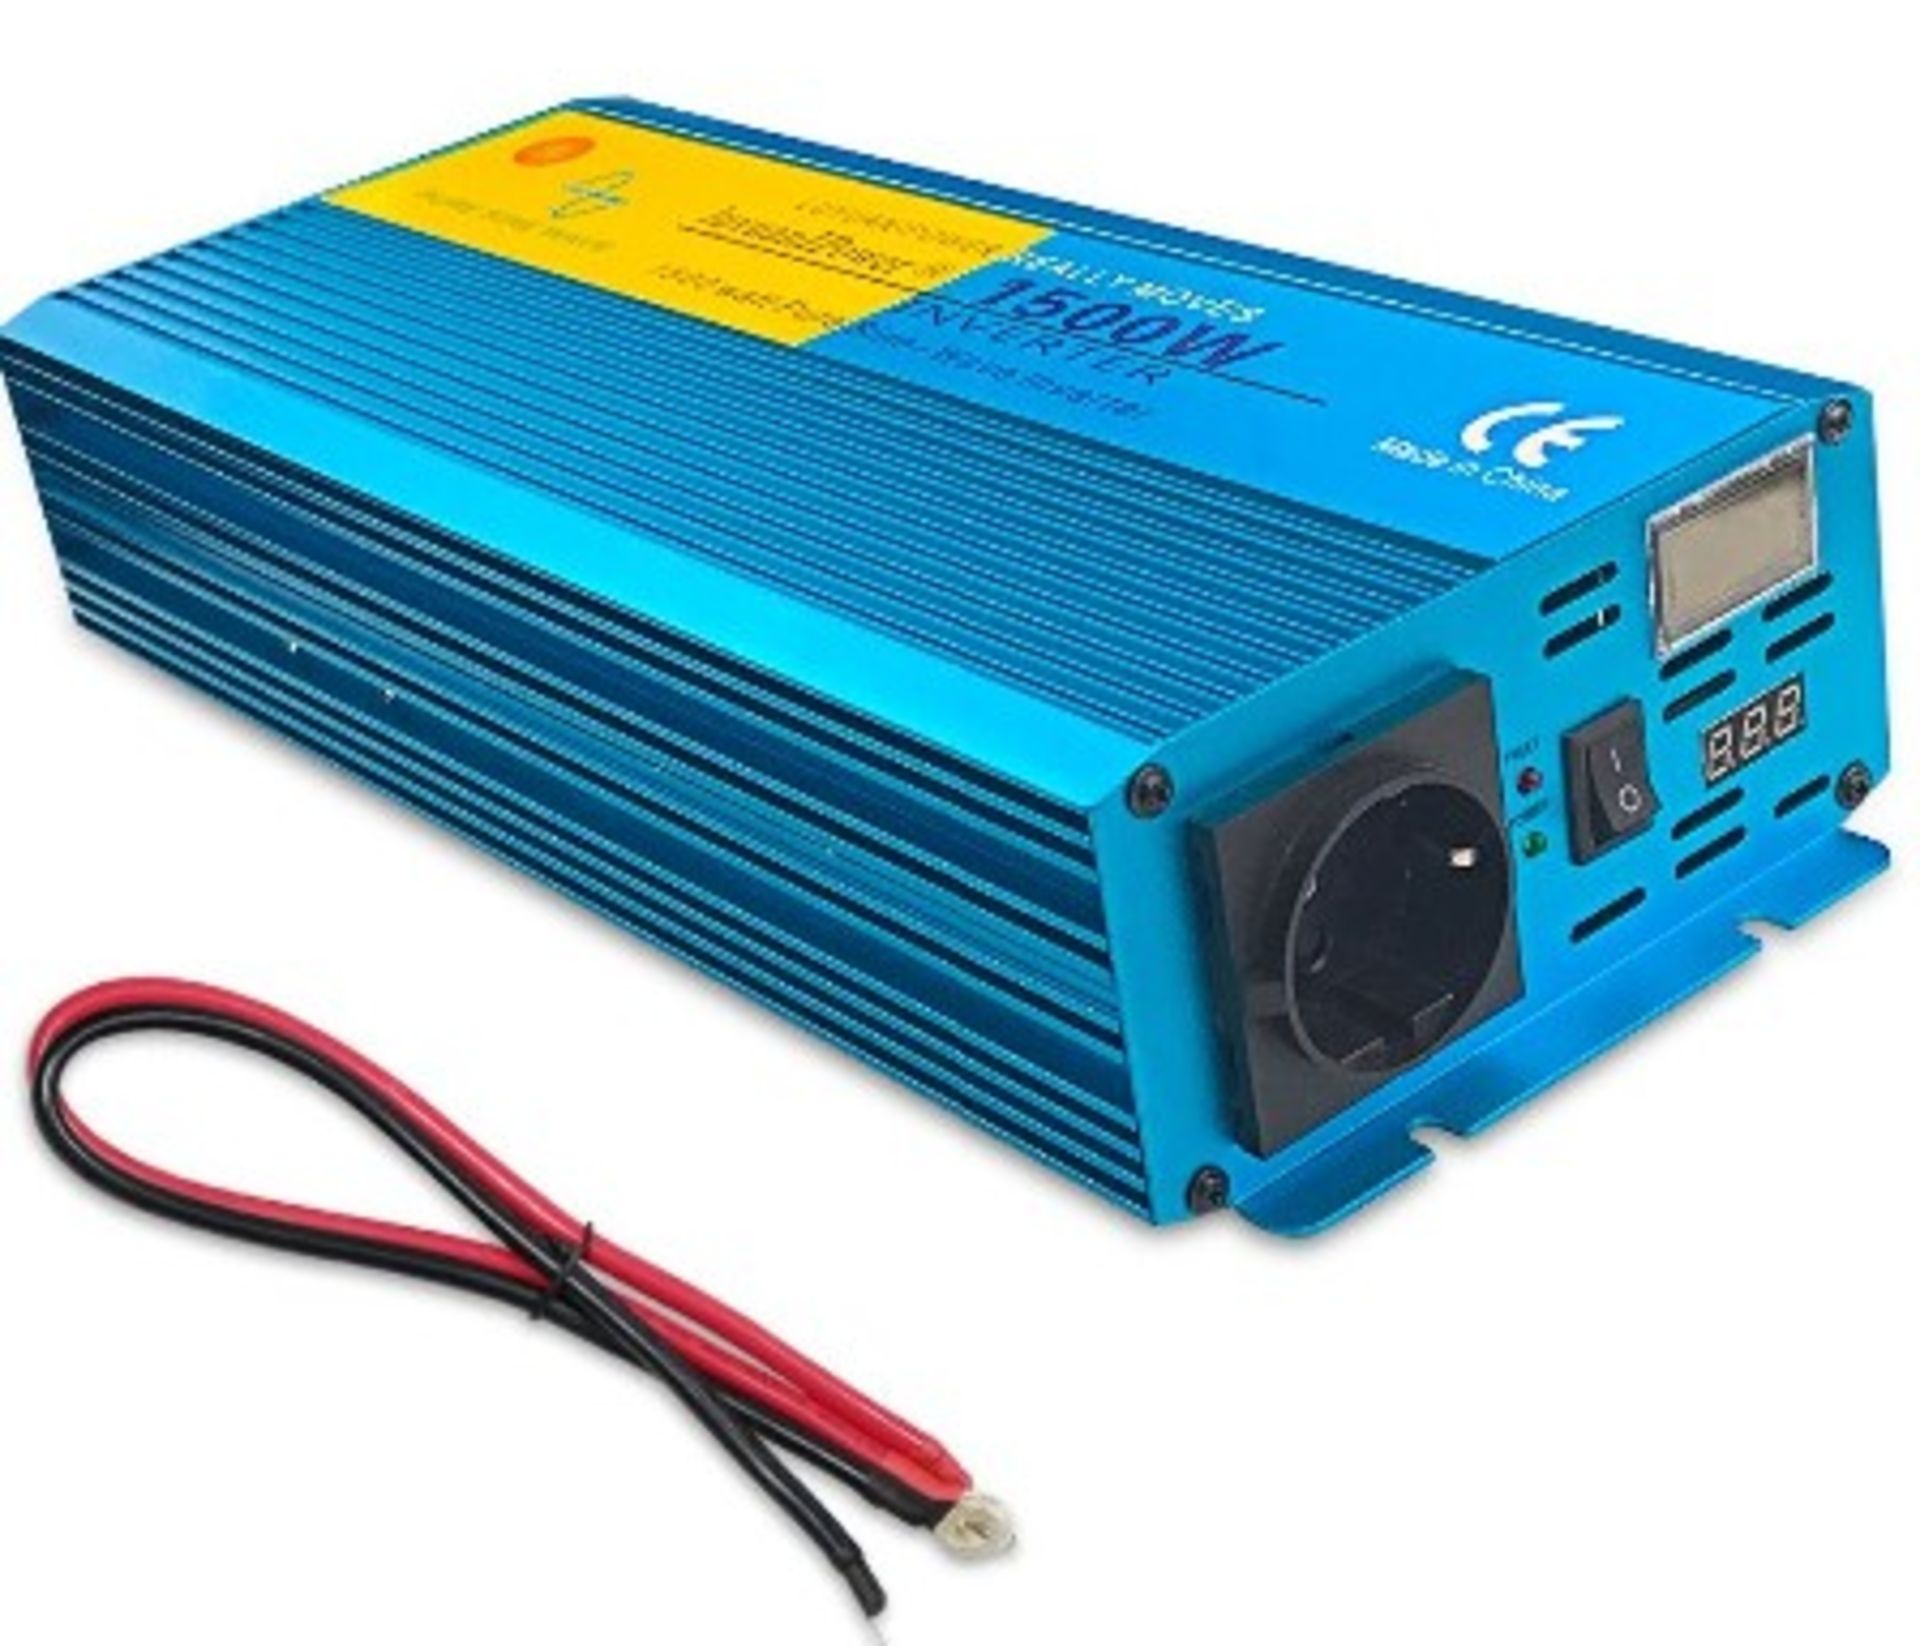 A boxed as new Luyuanipower DX-GAC1500W Power Inverter. 12V DC to 230V AC convertor with LCD